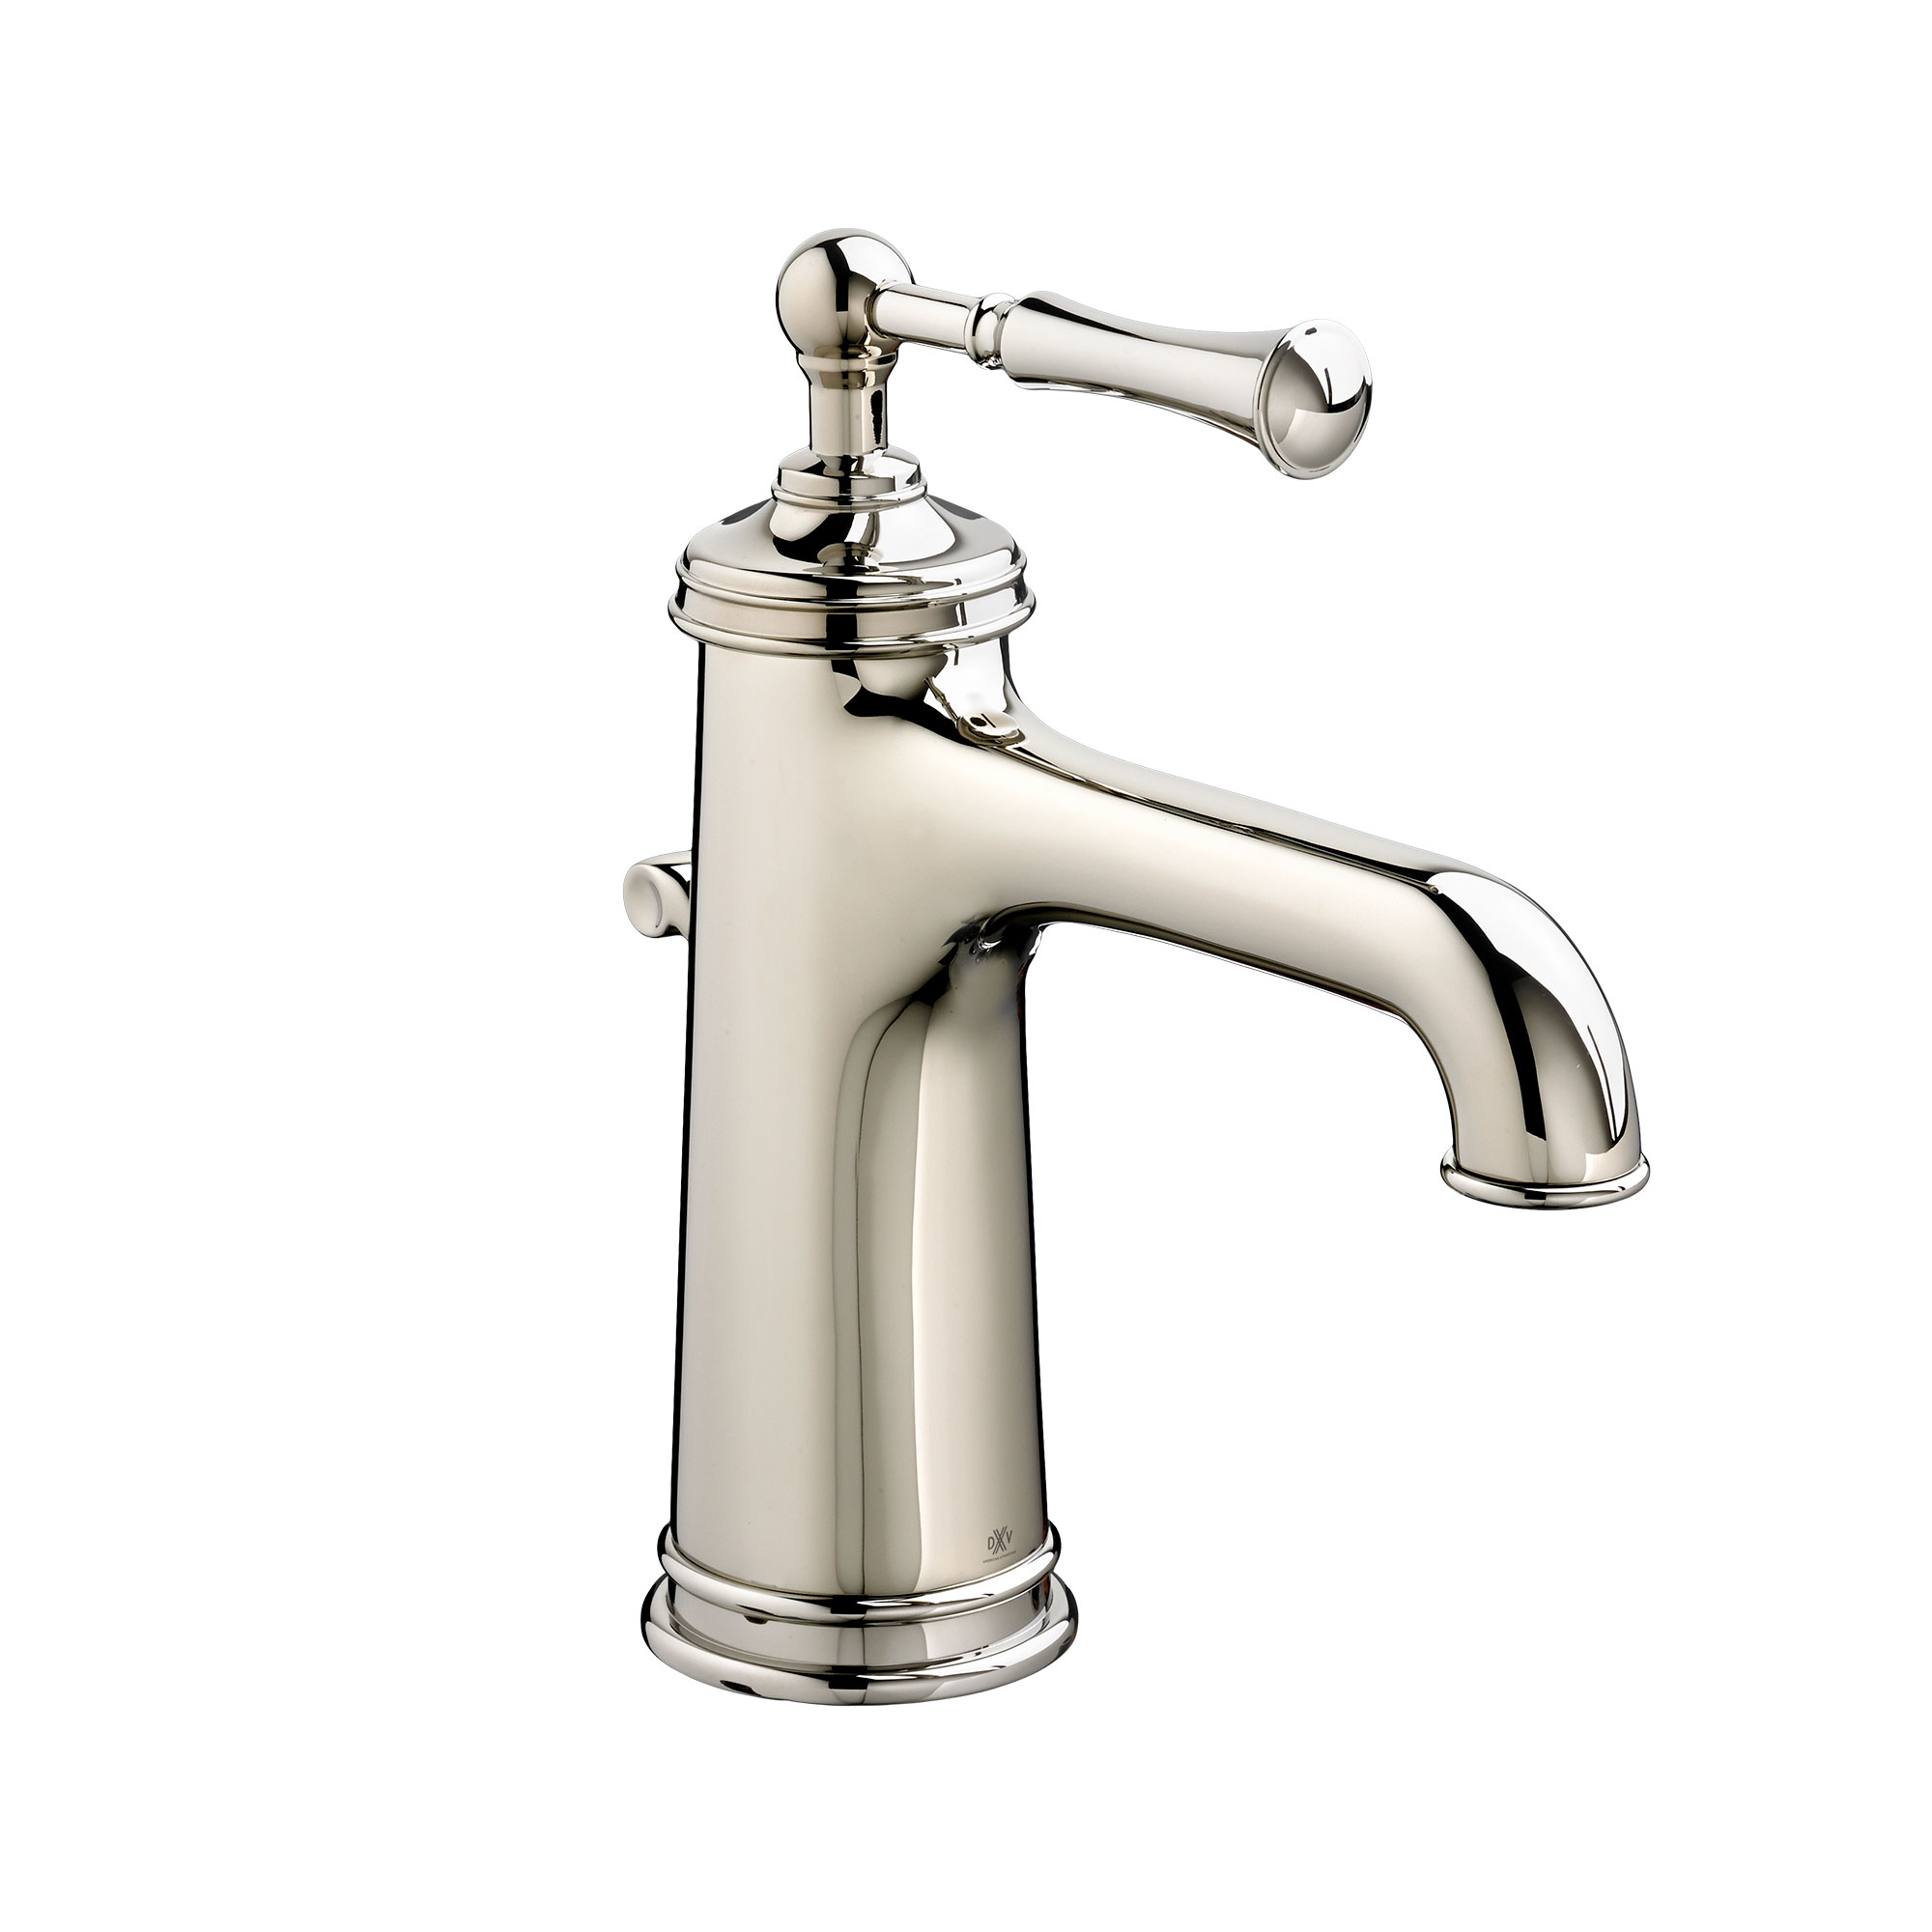 Randall Single Handle Bathroom Faucet with Lever Handle